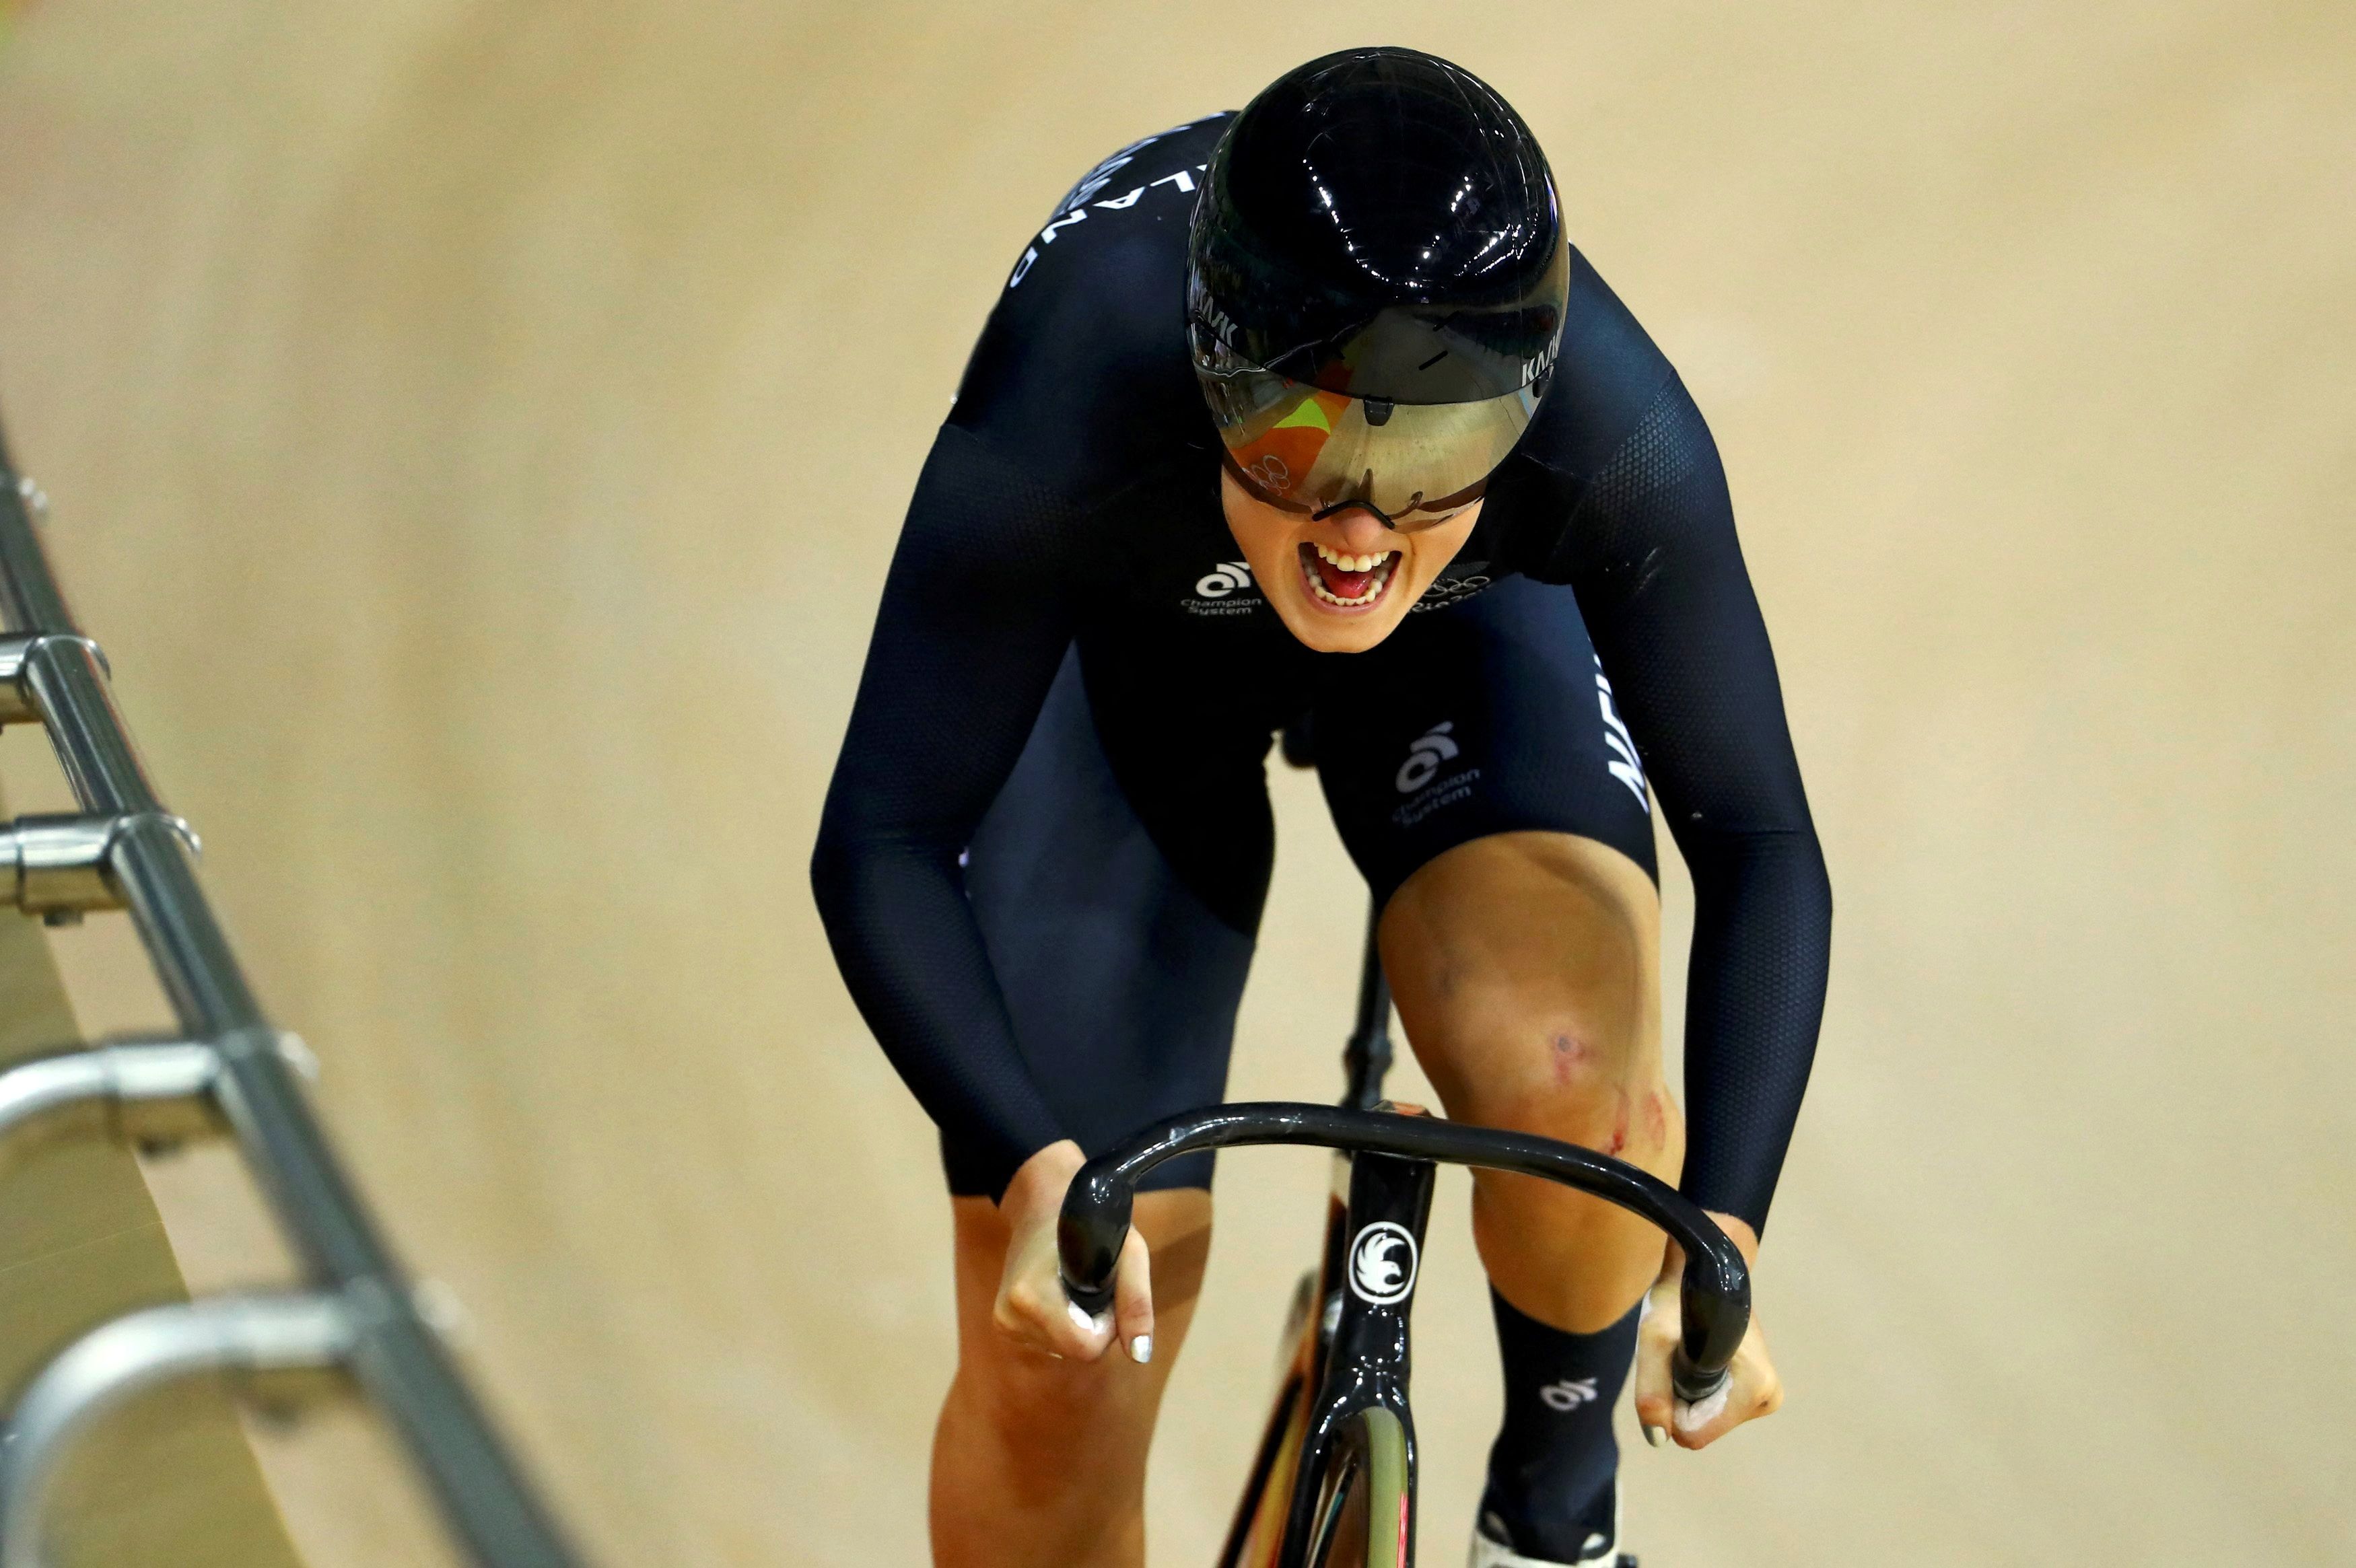 FILE PHOTO: 2016 Rio Olympics - Cycling Track - Preliminary - Women's Sprint Qualifying - Rio Olympic Velodrome - Rio de Janeiro, Brazil - 14/08/2016. Olivia Podmore (NZL) of New Zealand competes. REUTERS/Paul Hanna FOR EDITORIAL USE ONLY. NOT FOR SALE FOR  MARKETING OR ADVERTISING CAMPAIGNS/File Photo